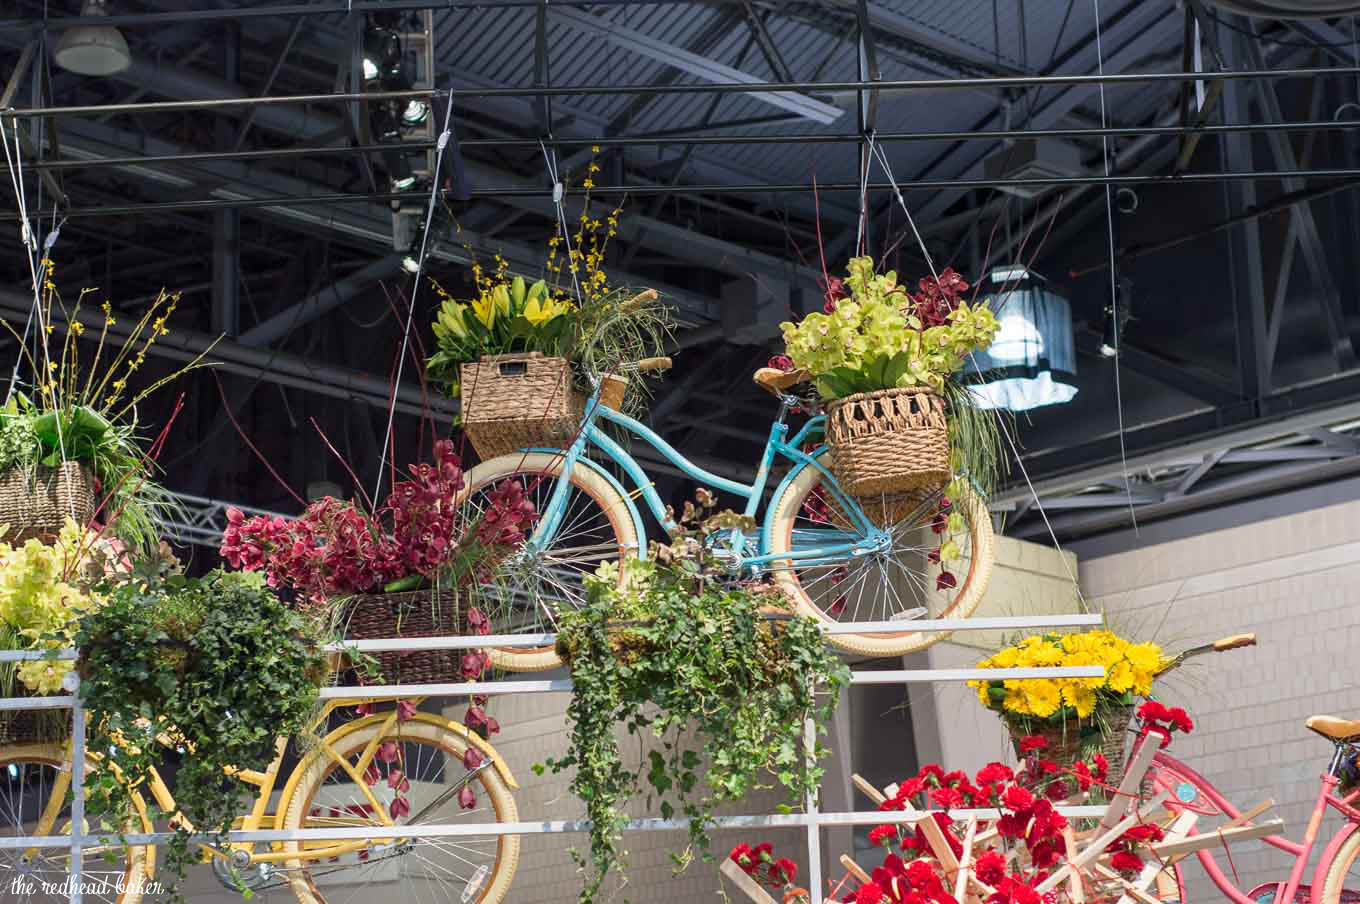 I'm sharing a few photos from this year's annual Philadelphia Flower Show, an event put on the Philadelphia Horticultural Society. This year's theme is Holland.